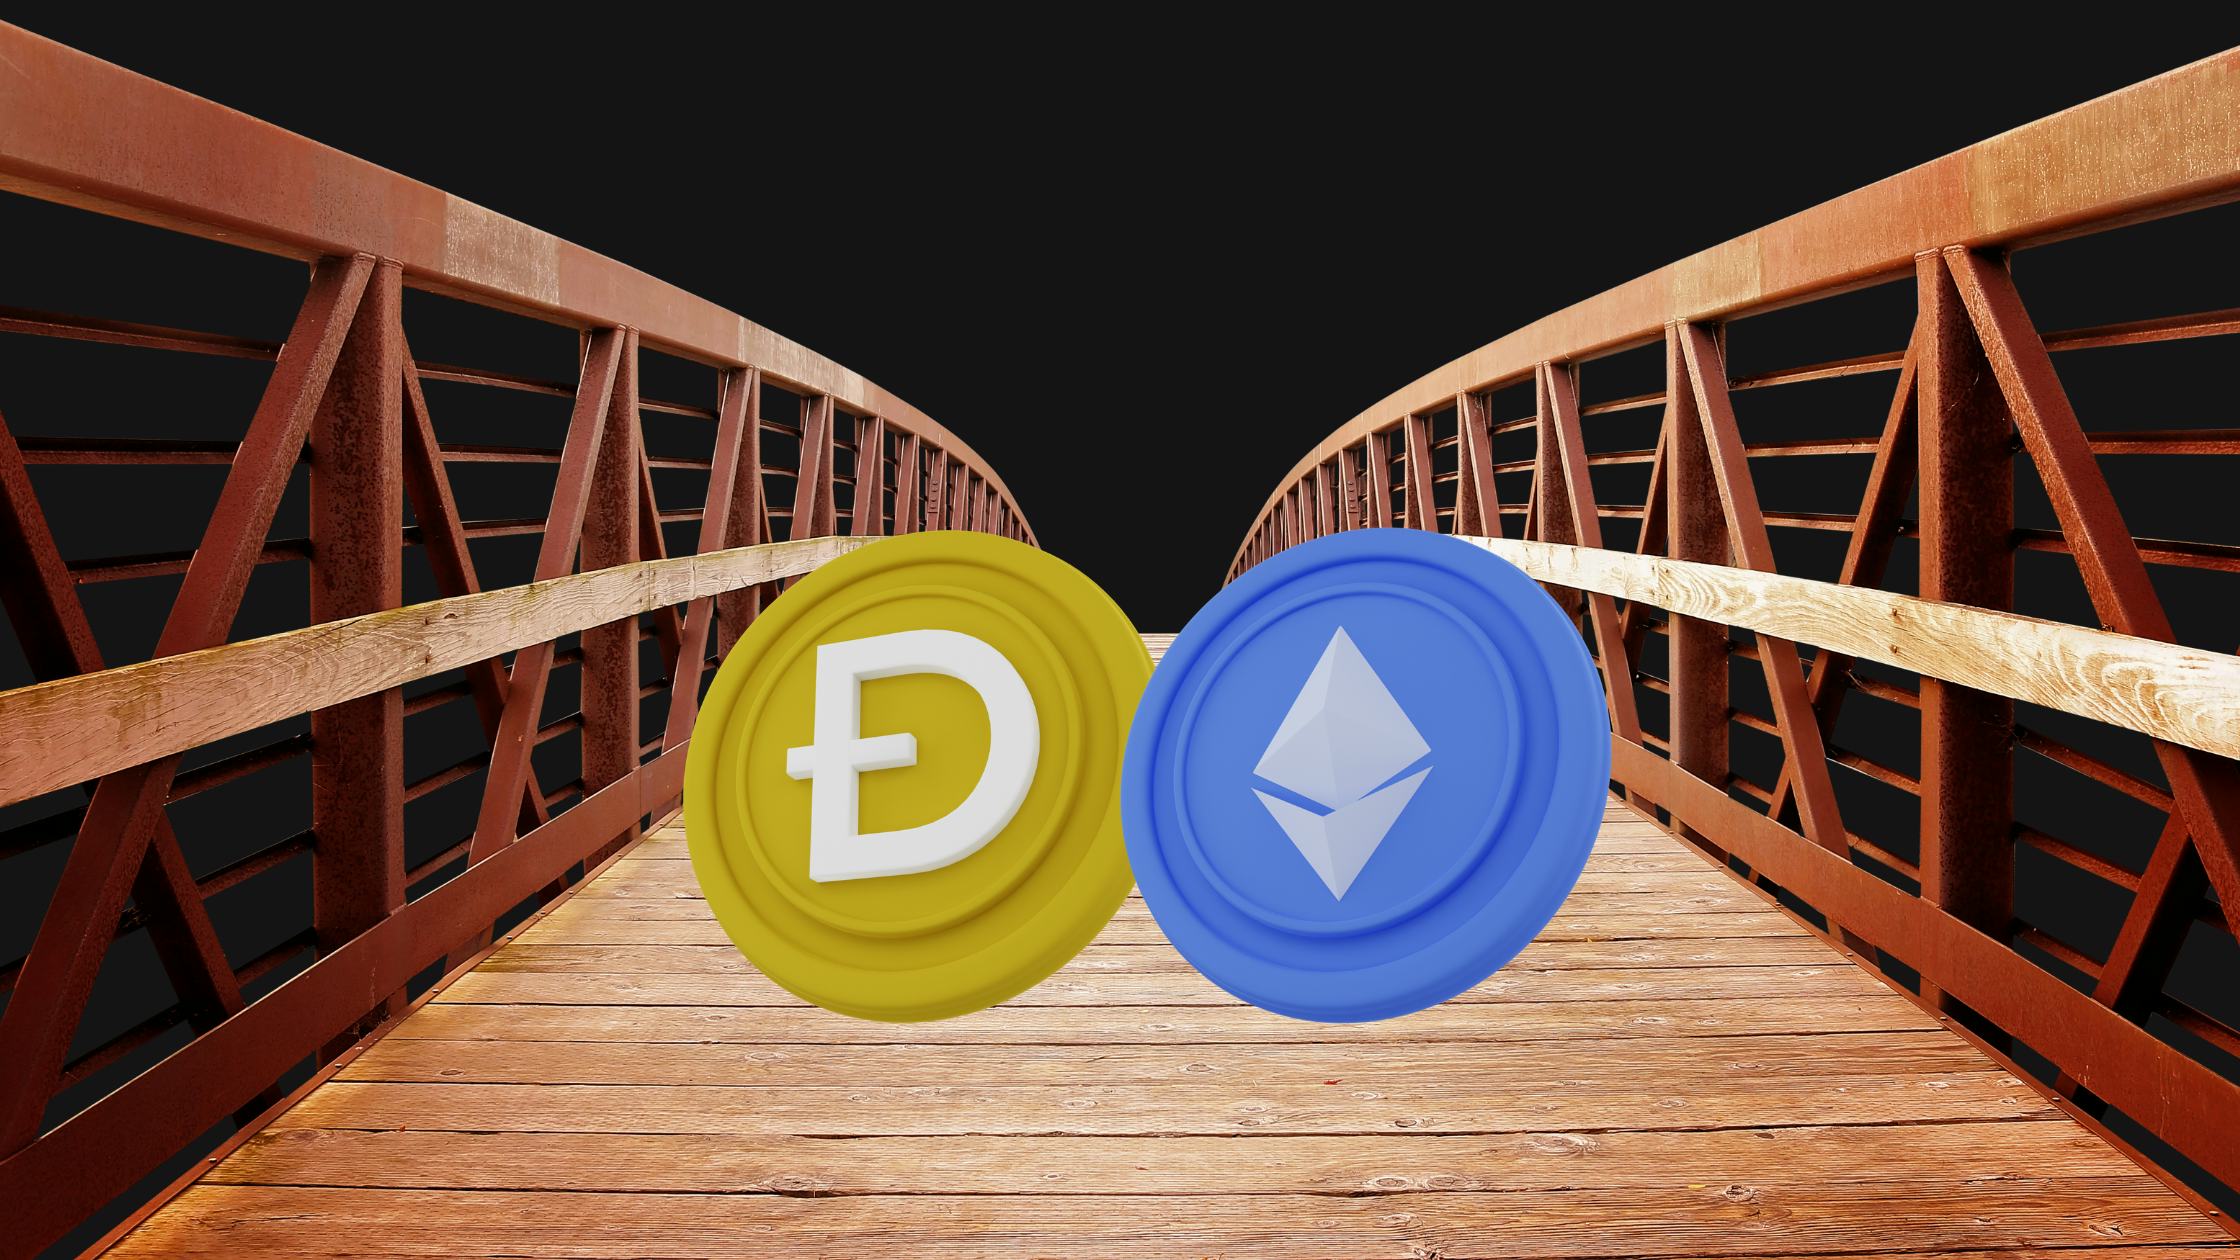 Dogecoin-Ethereum Bridge Expected to Go Live in 2022